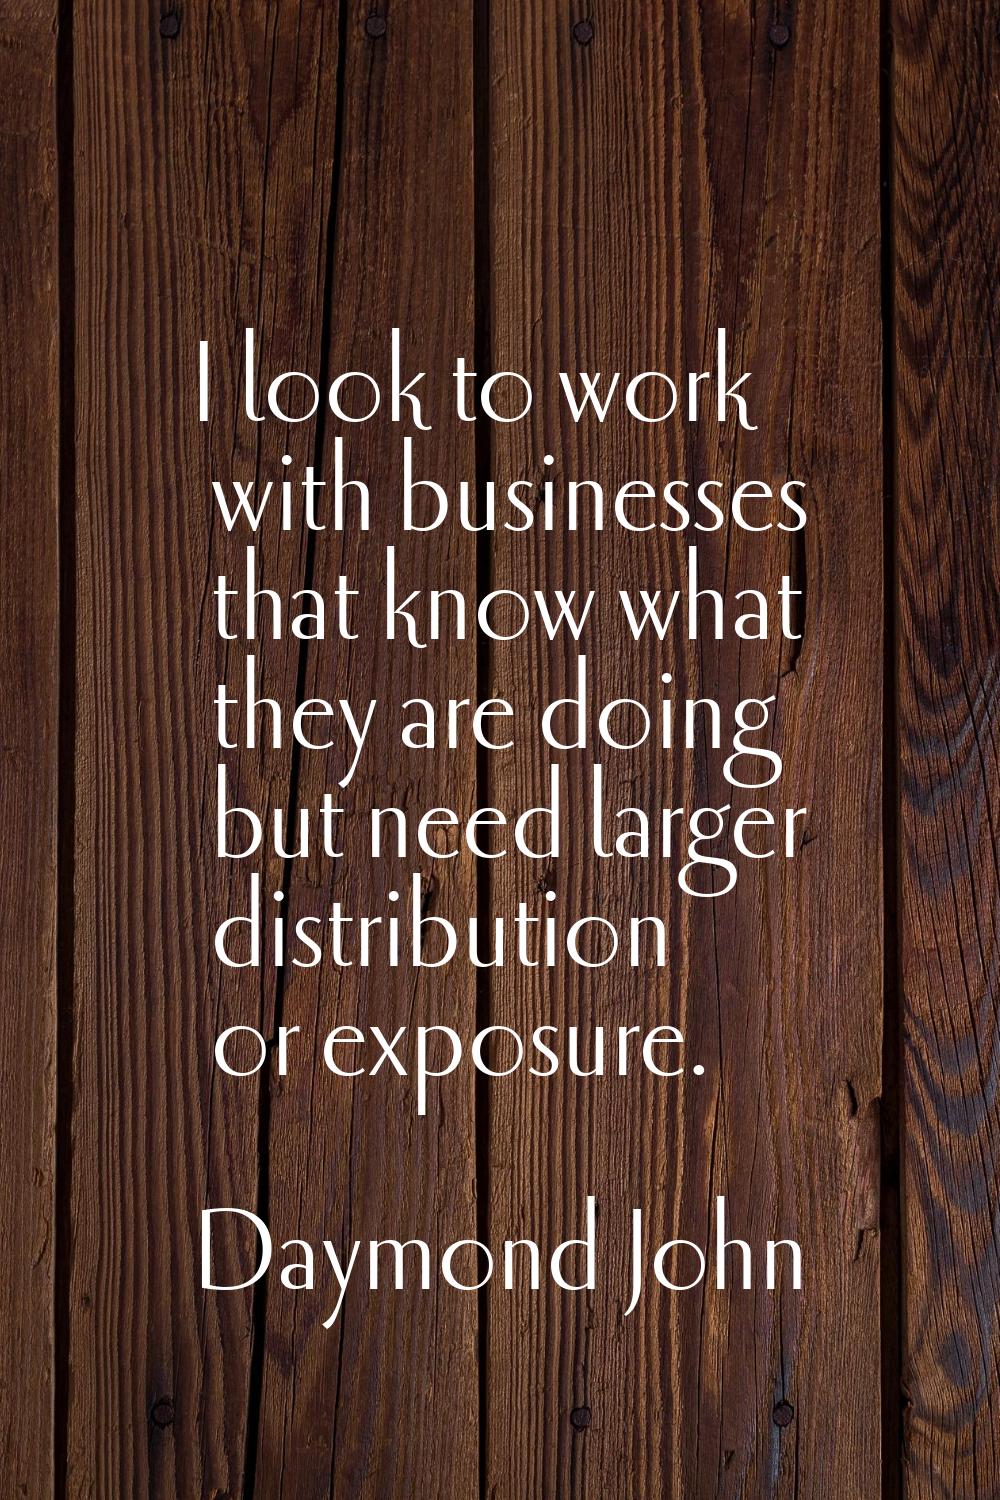 I look to work with businesses that know what they are doing but need larger distribution or exposu